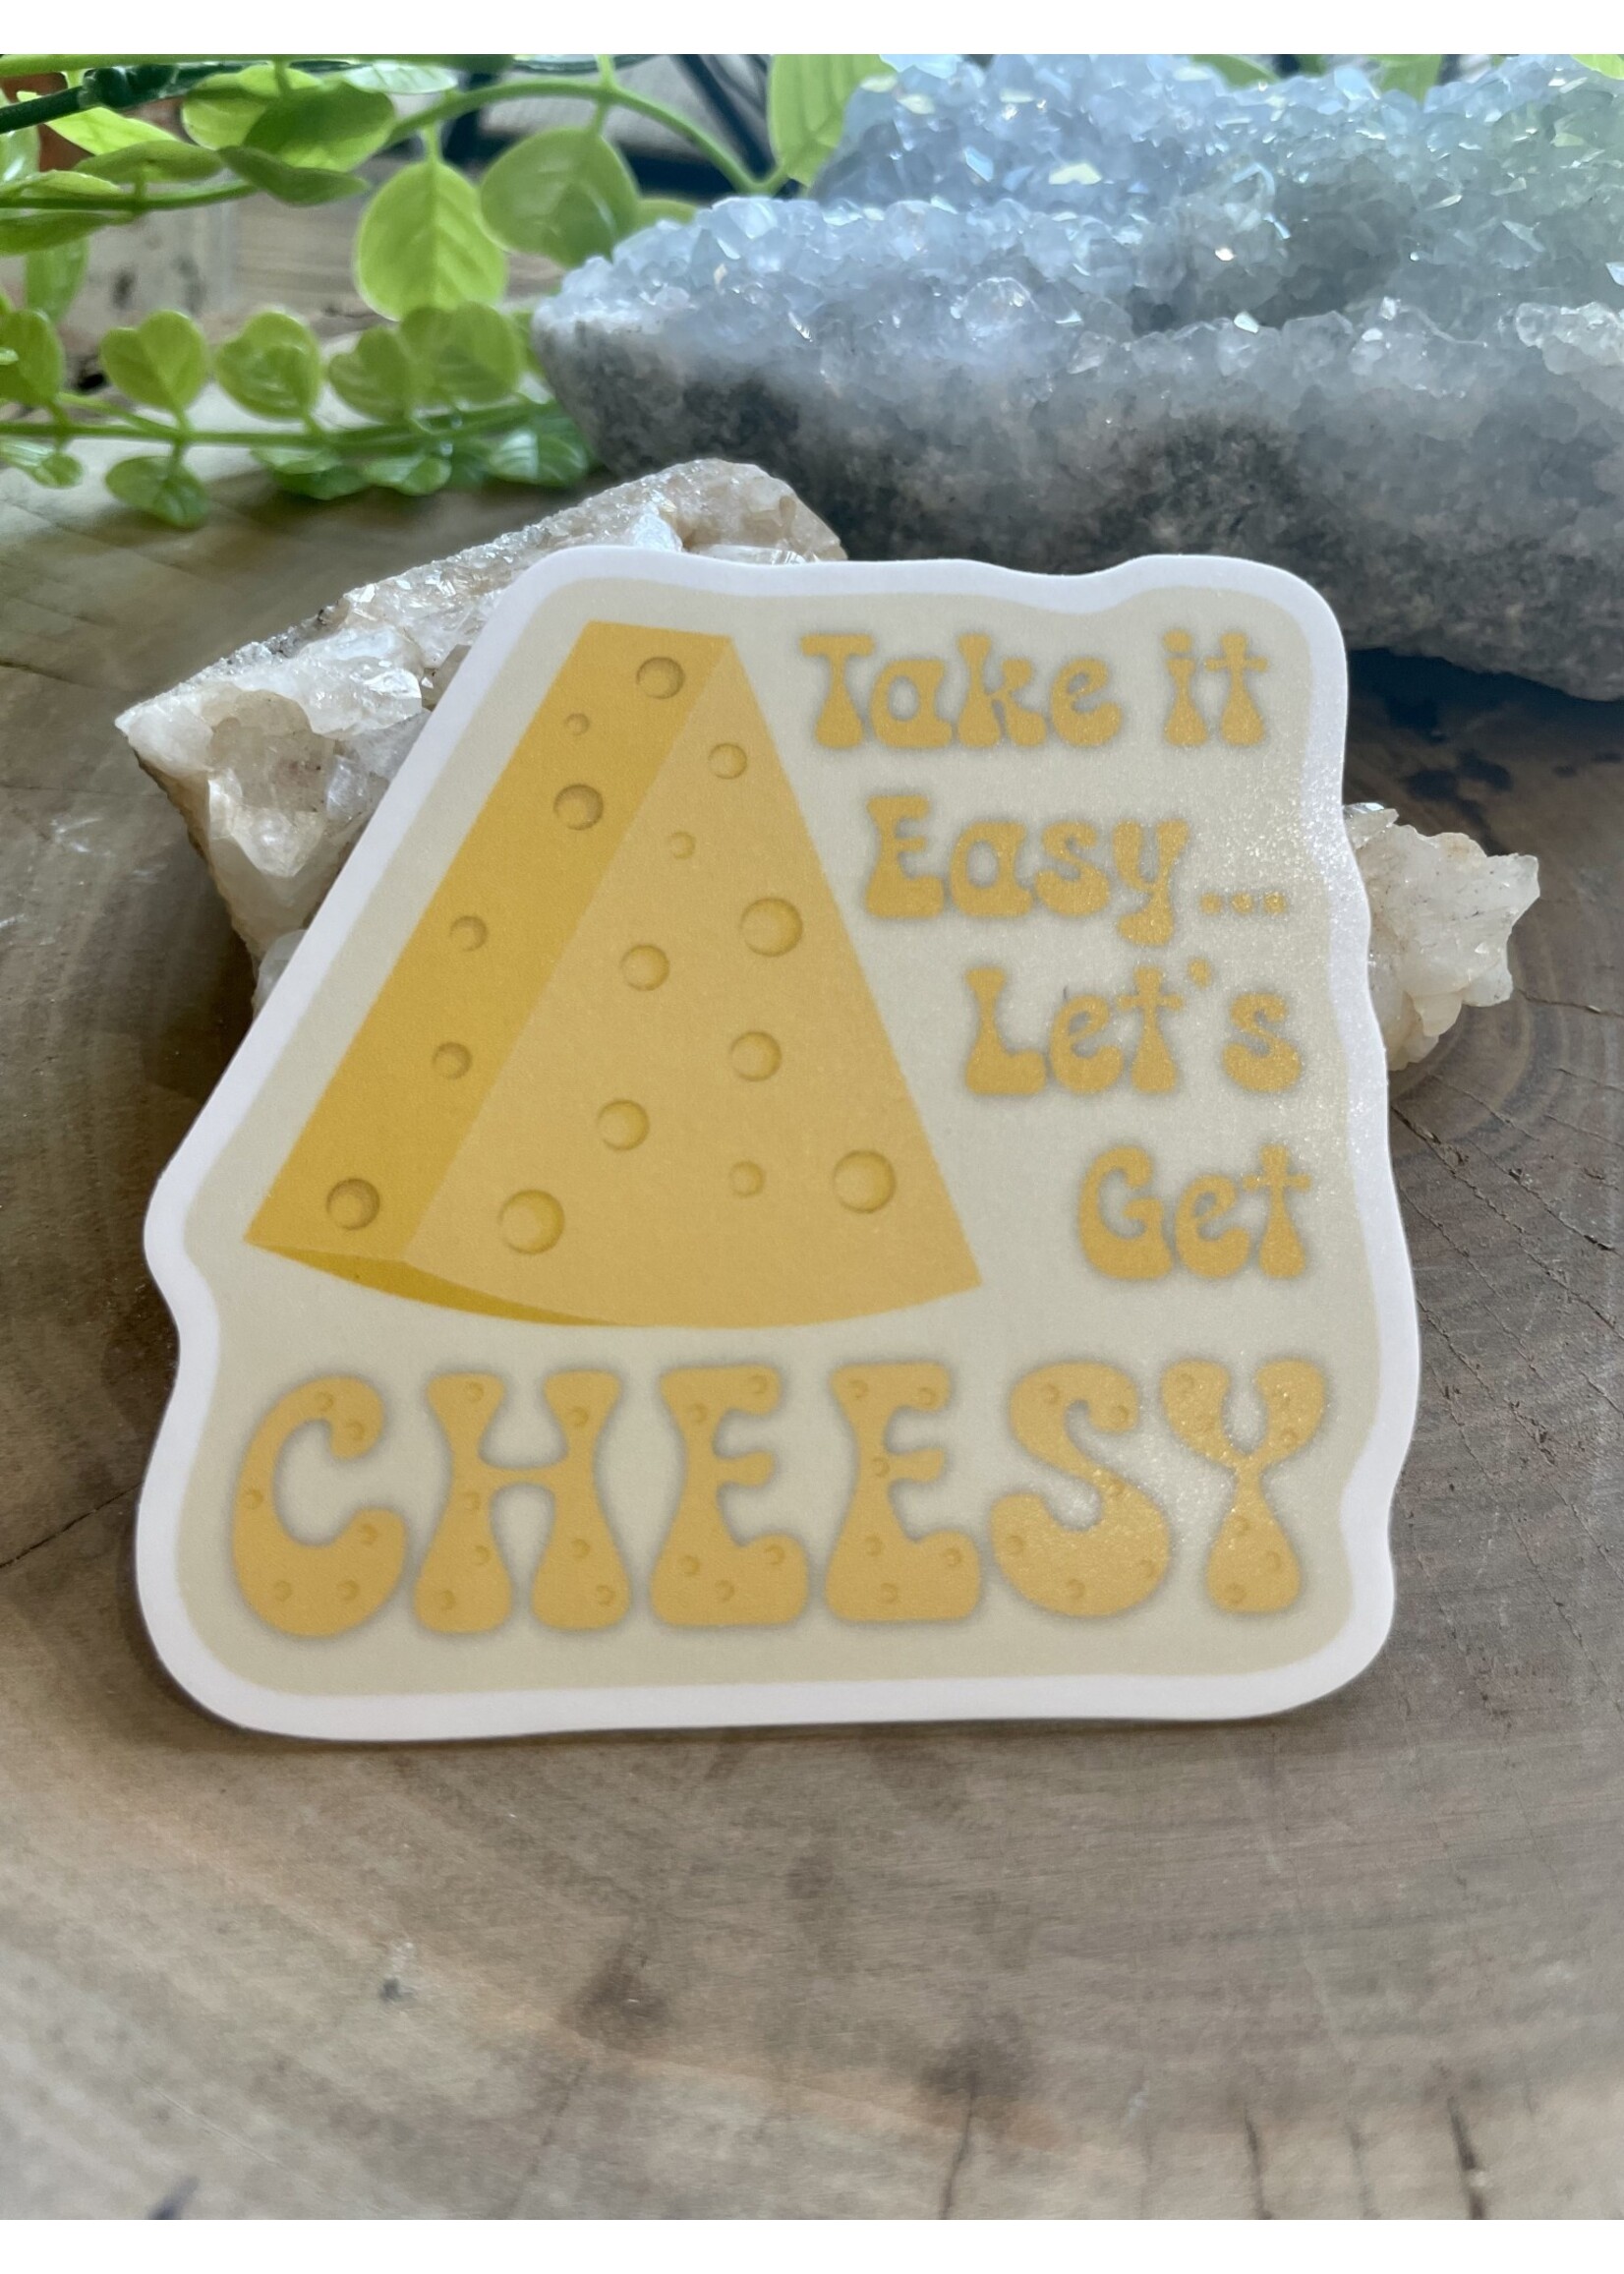 Tangled Up In Hue Sticker - Take it Easy Lets Get Cheesy